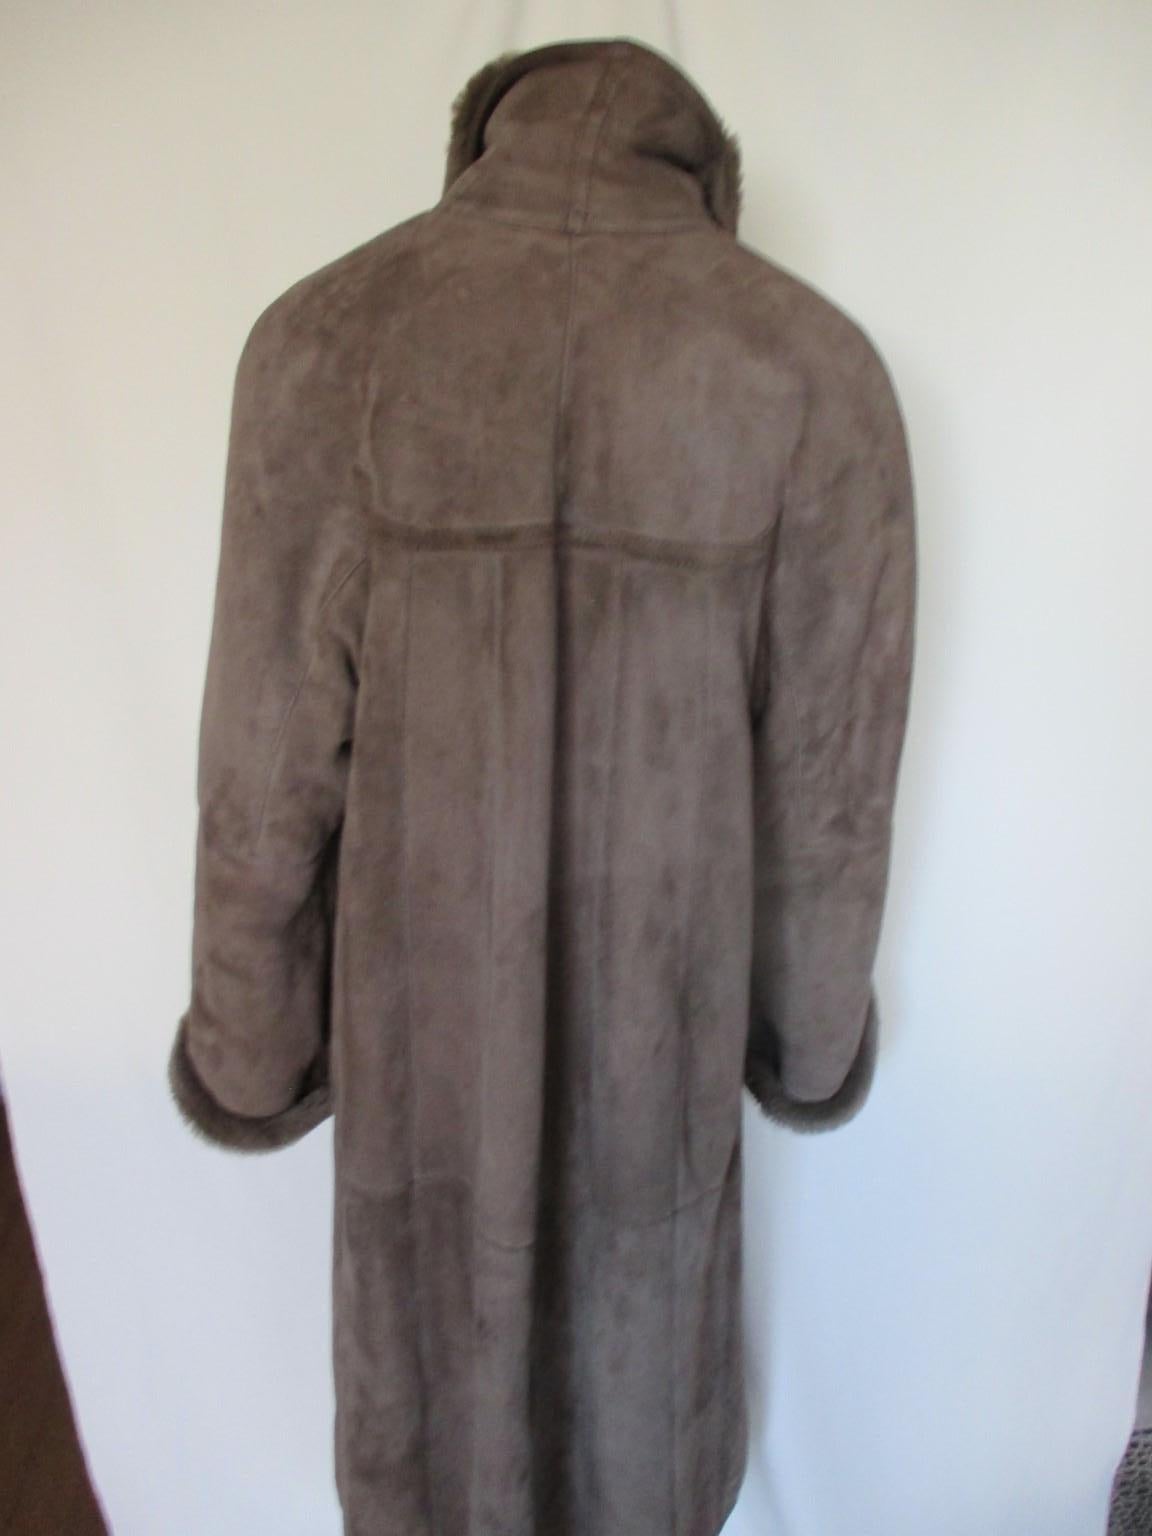 Long Lamb Suede Shearling Fur Coat In Good Condition For Sale In Amsterdam, NL